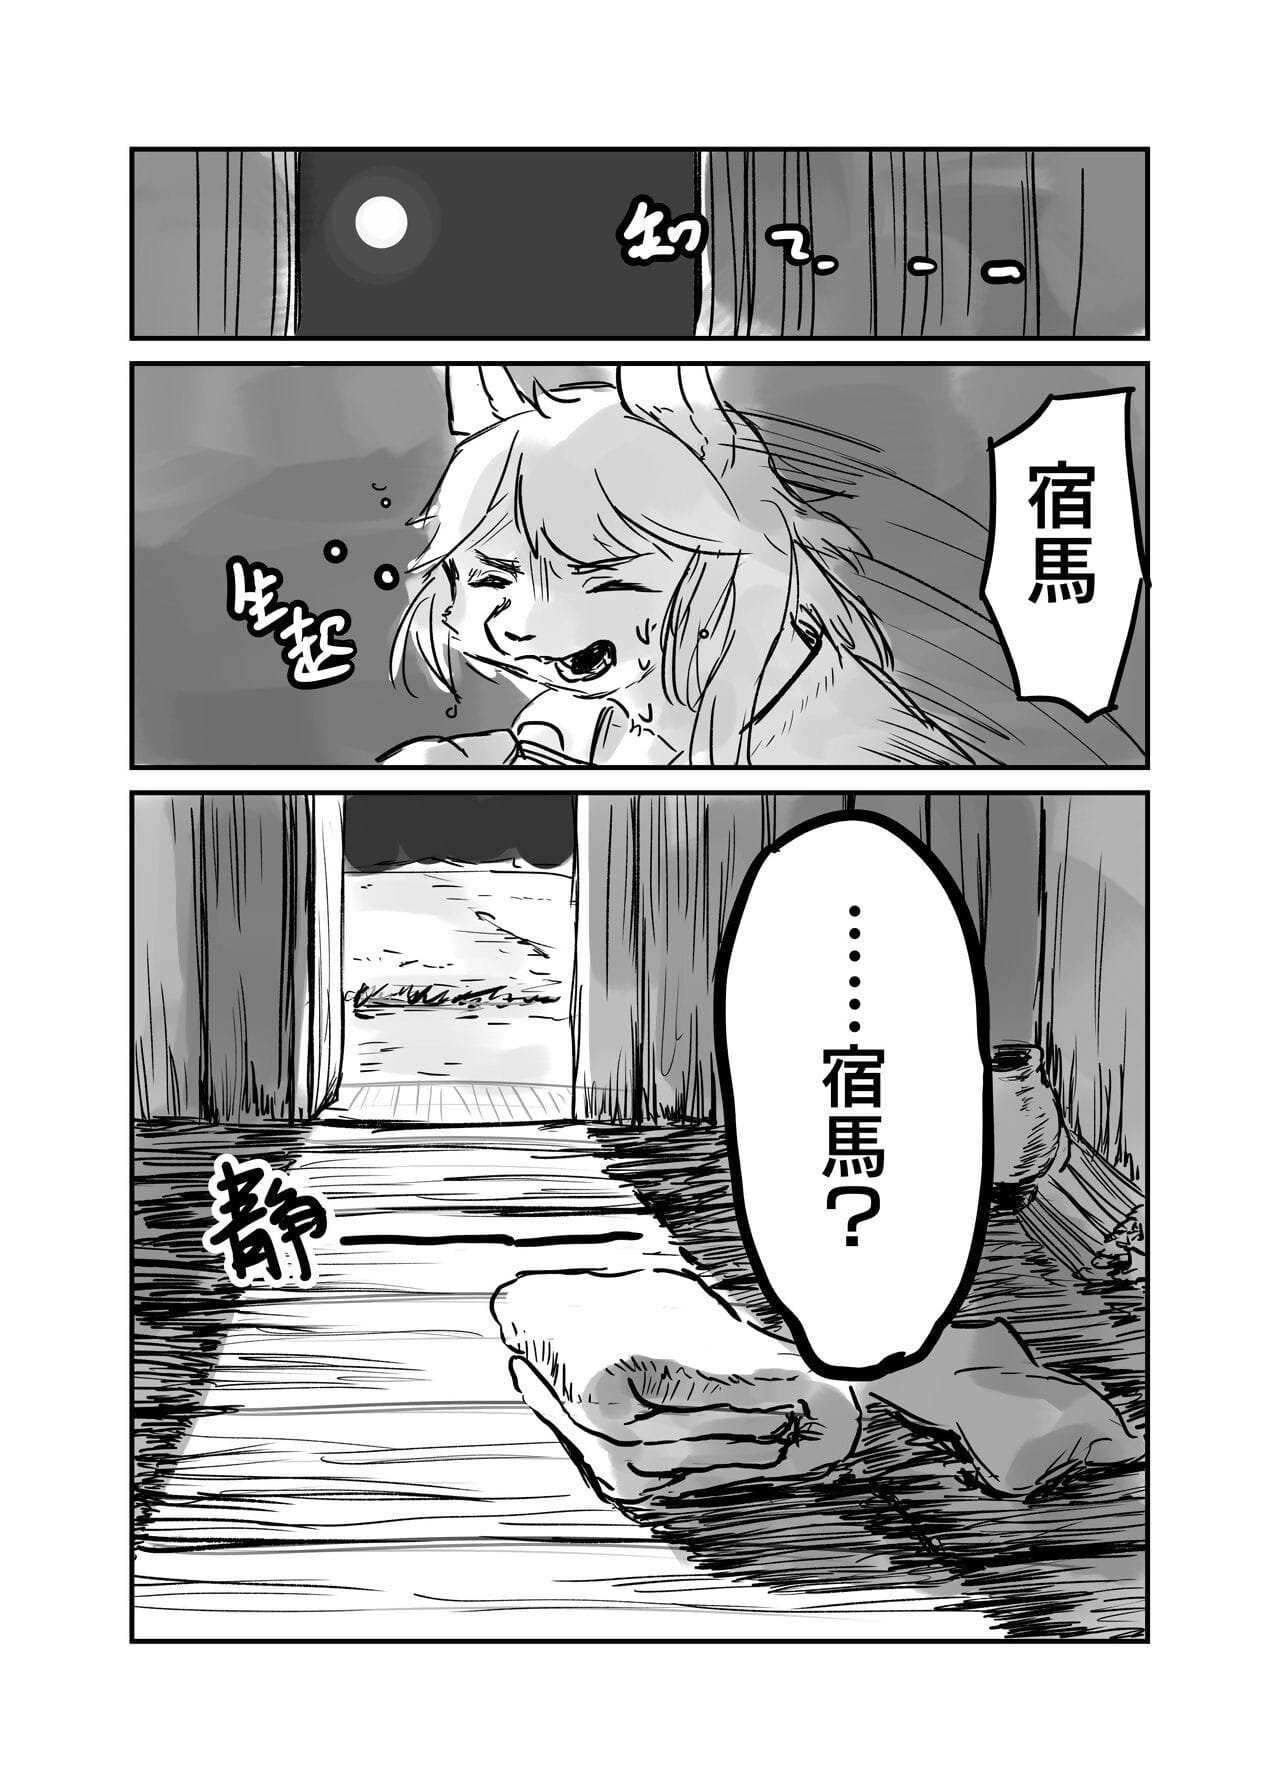 （the زائر 他乡之人 by：鬼流 جزء 2 page 1